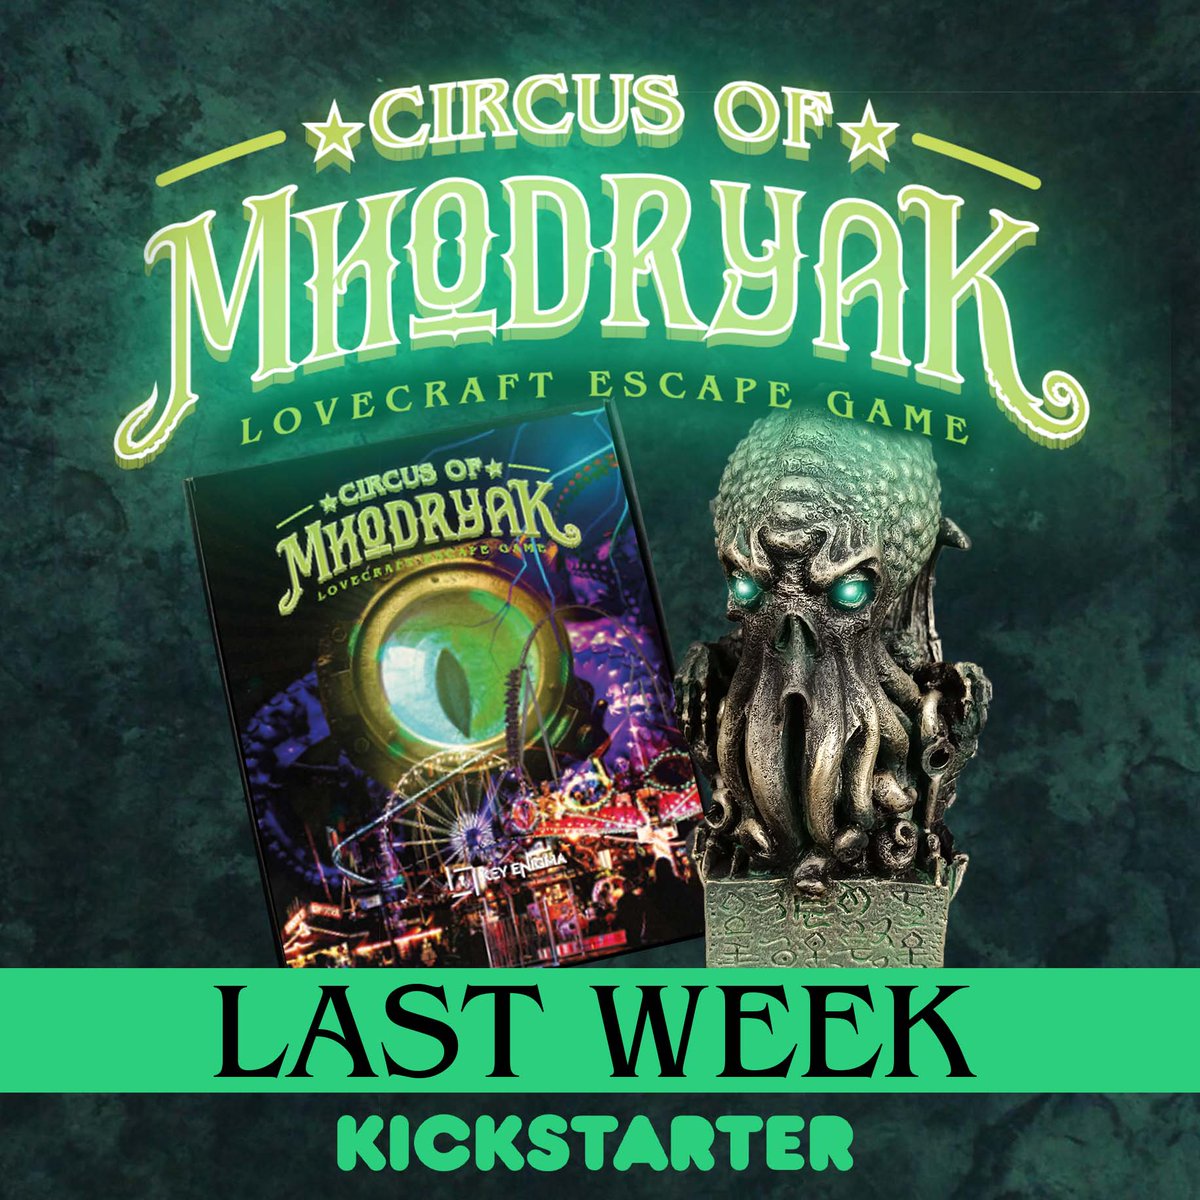 We are entering the final stretch of the campaign, enter to get the new Circus of Mhodryak game at a reduced price! #kicksterterlastweek #lastweek #kickstarter #escaperoom #escapegame #indiegames